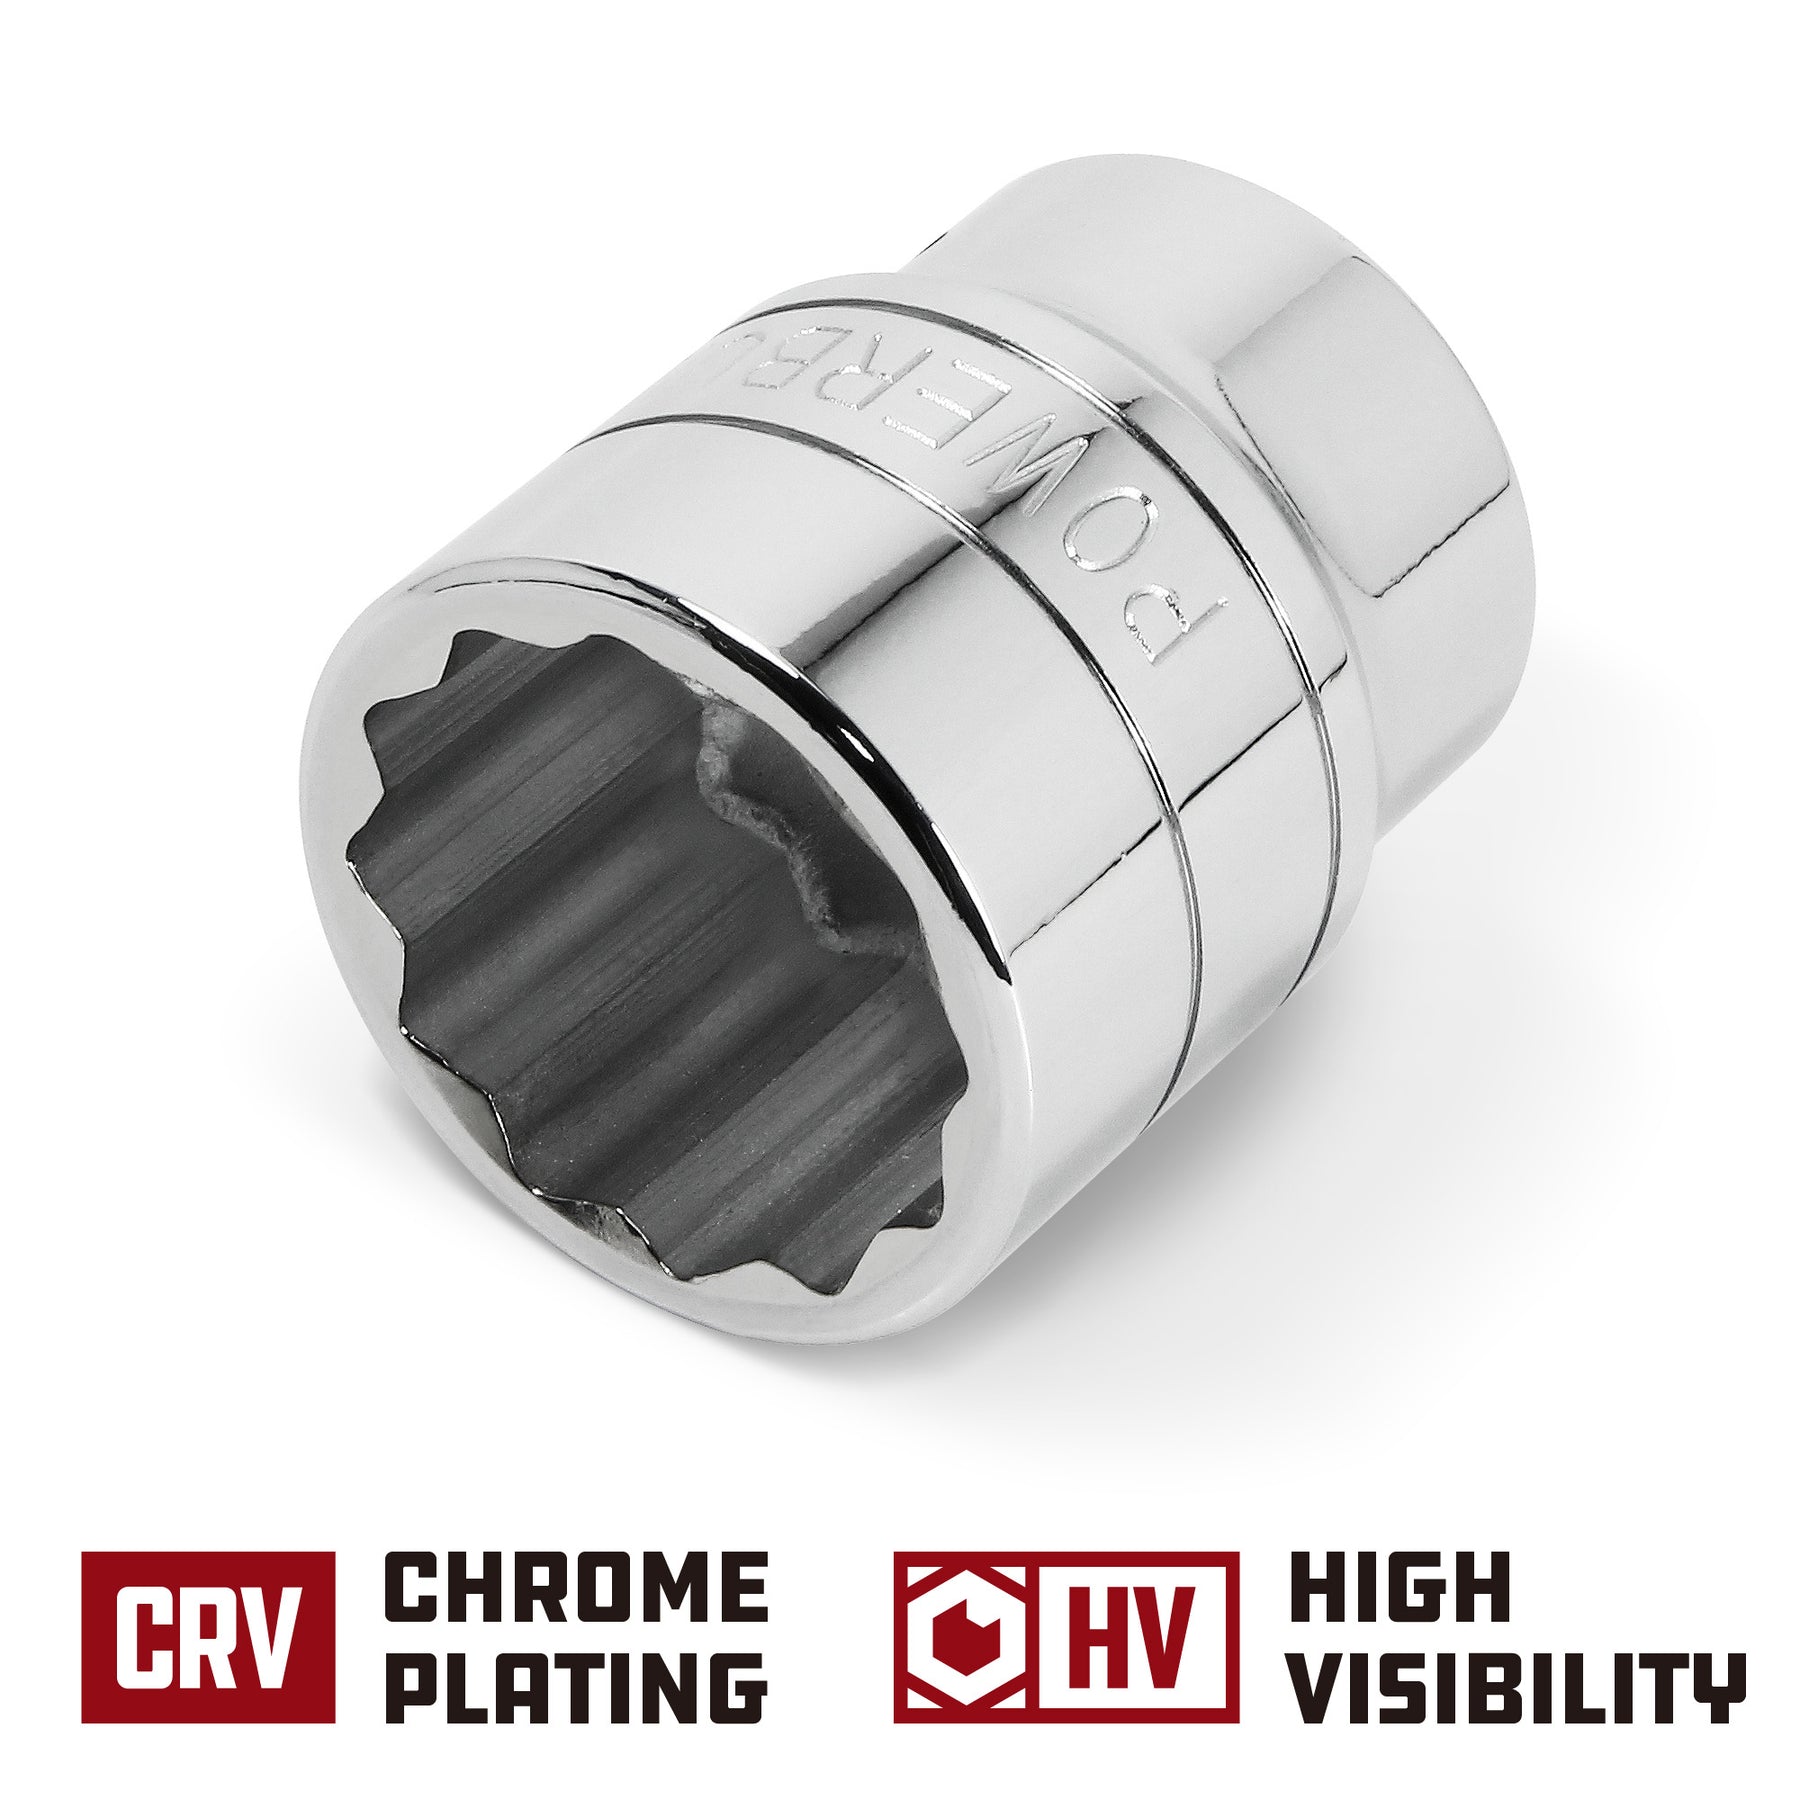 3/4 Inch Drive x 1-1/2 Inch 12 Point Shallow Socket